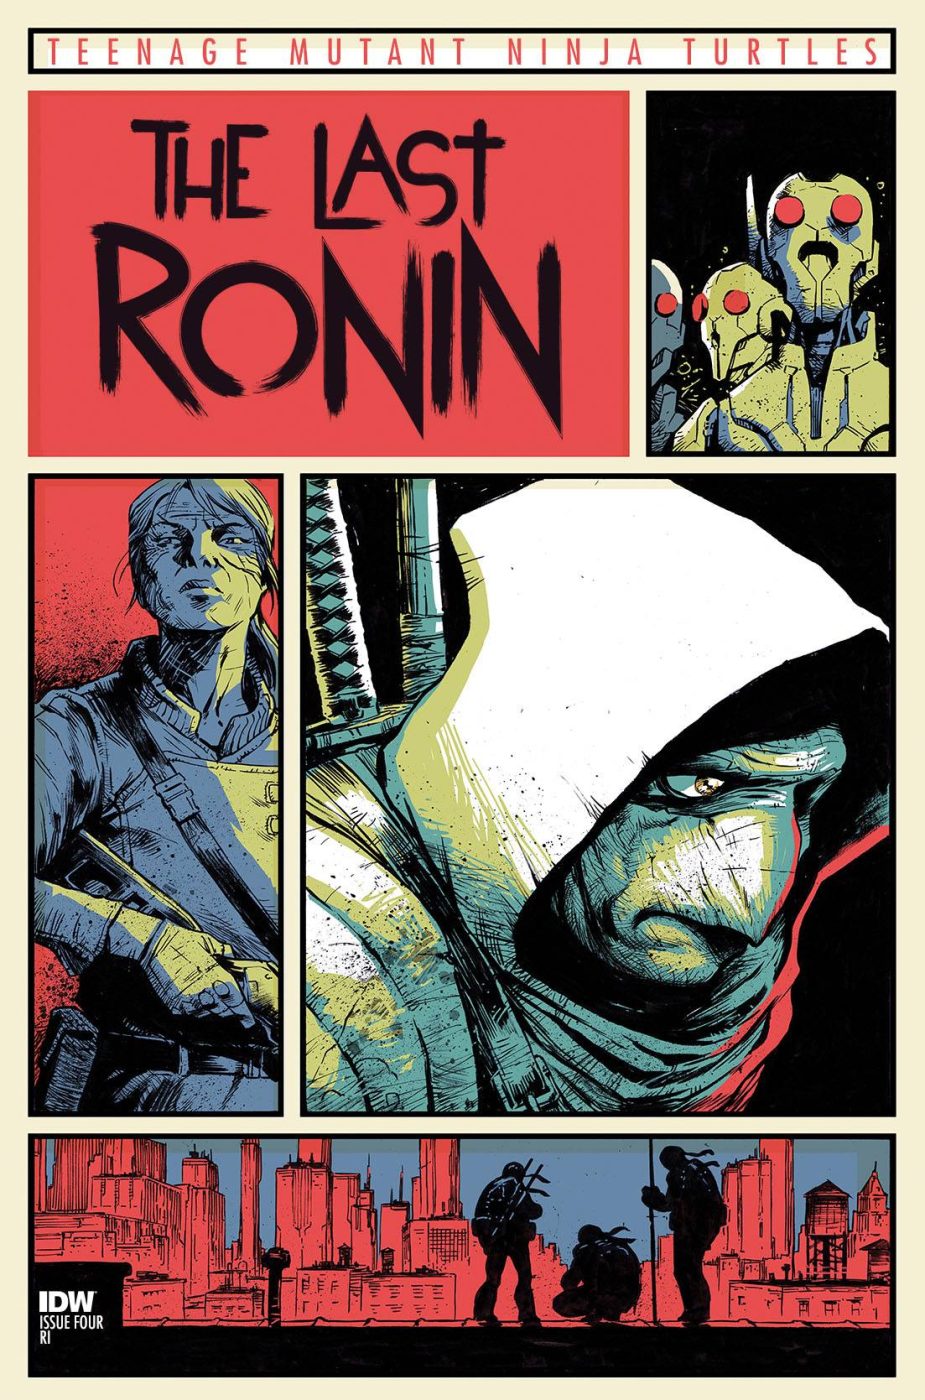 TMNT Last Ronin #4 (Dave Wachter 1/10 B Cover)